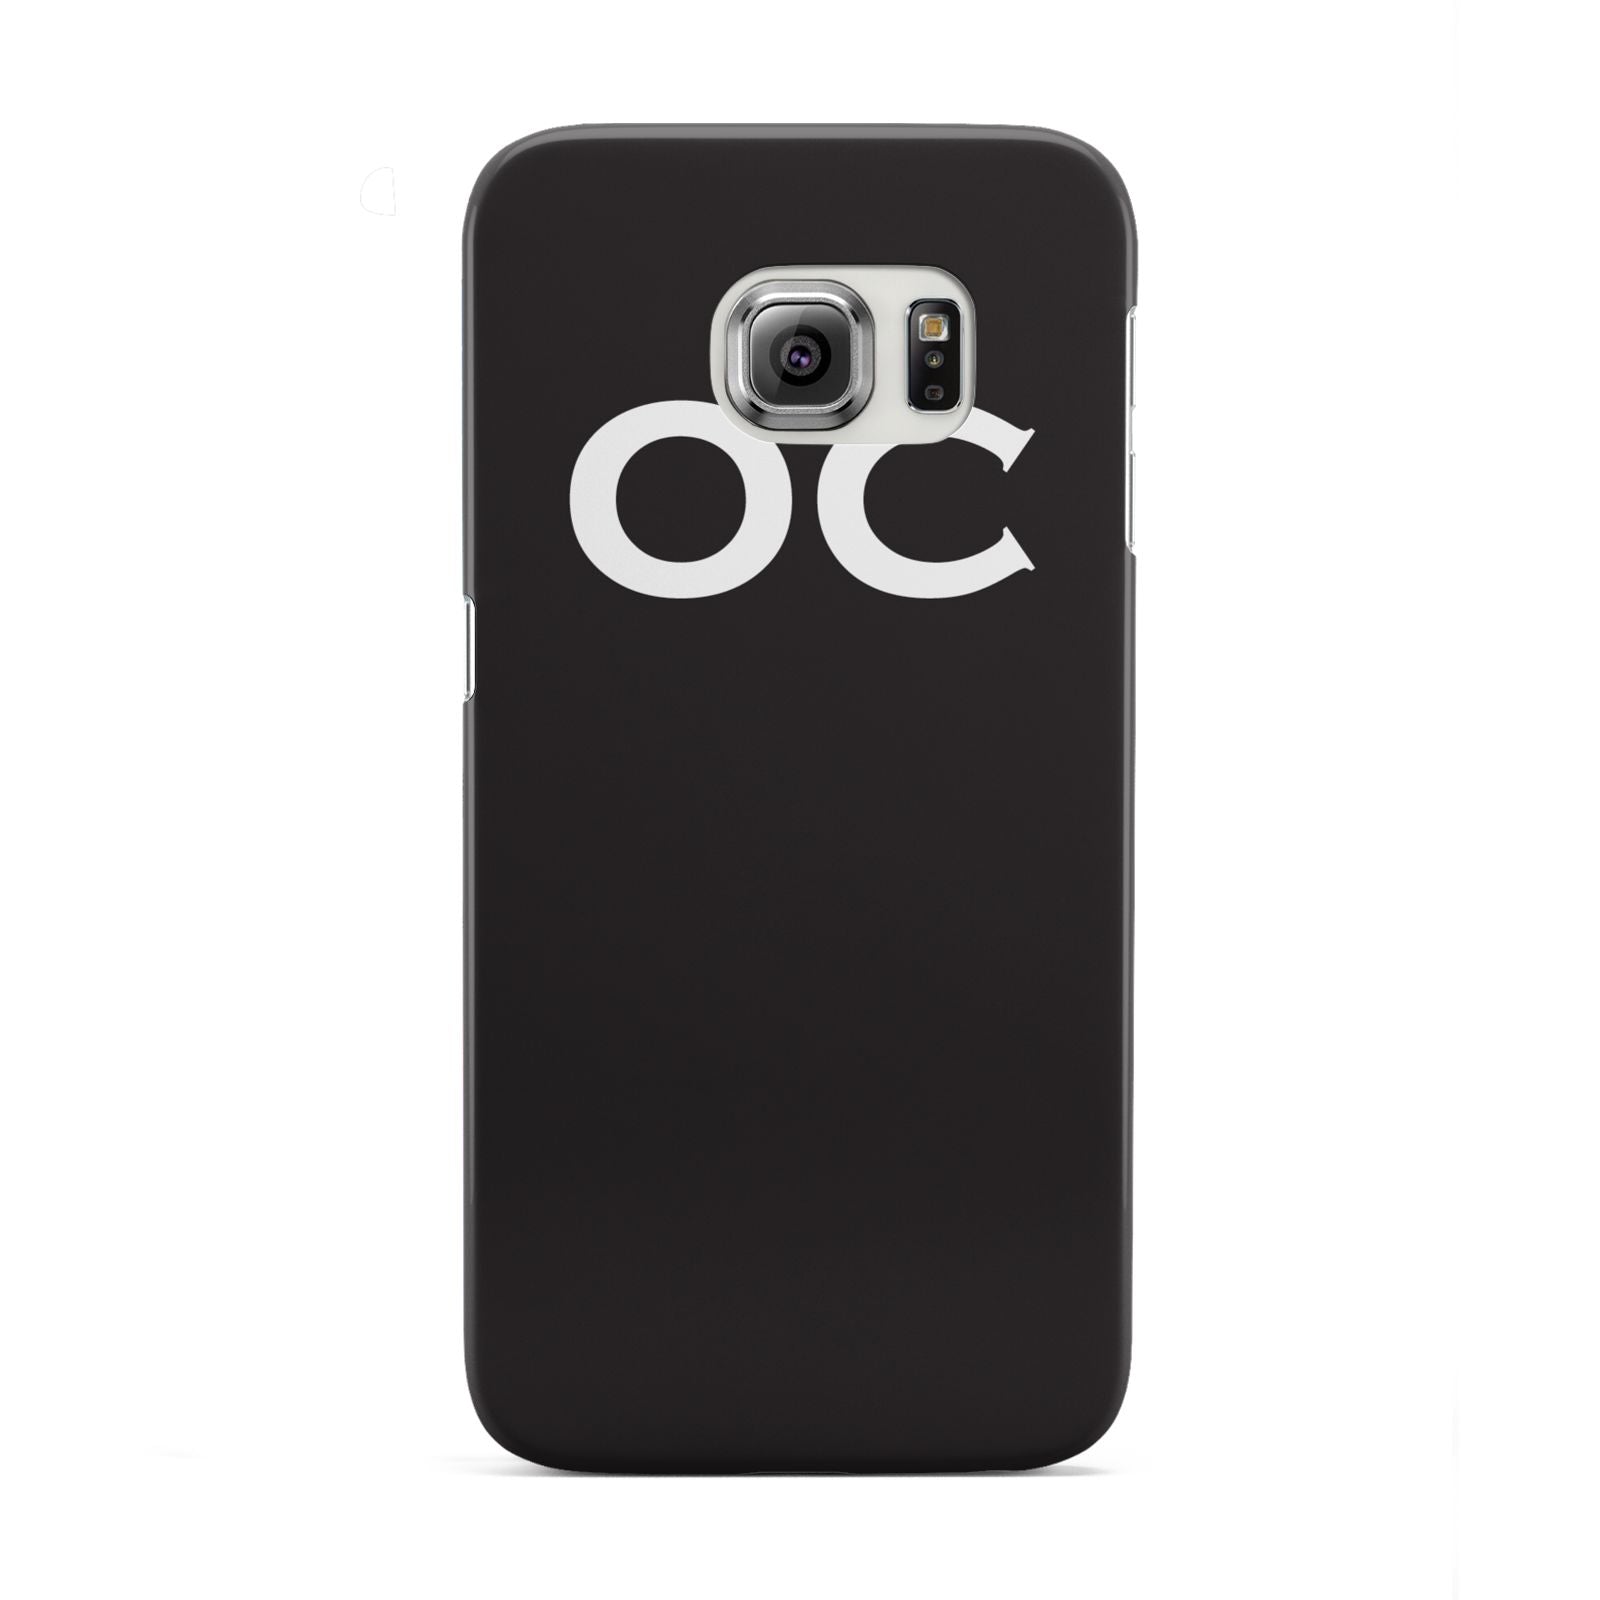 Personalised Black with Initials Samsung Galaxy S6 Edge Case